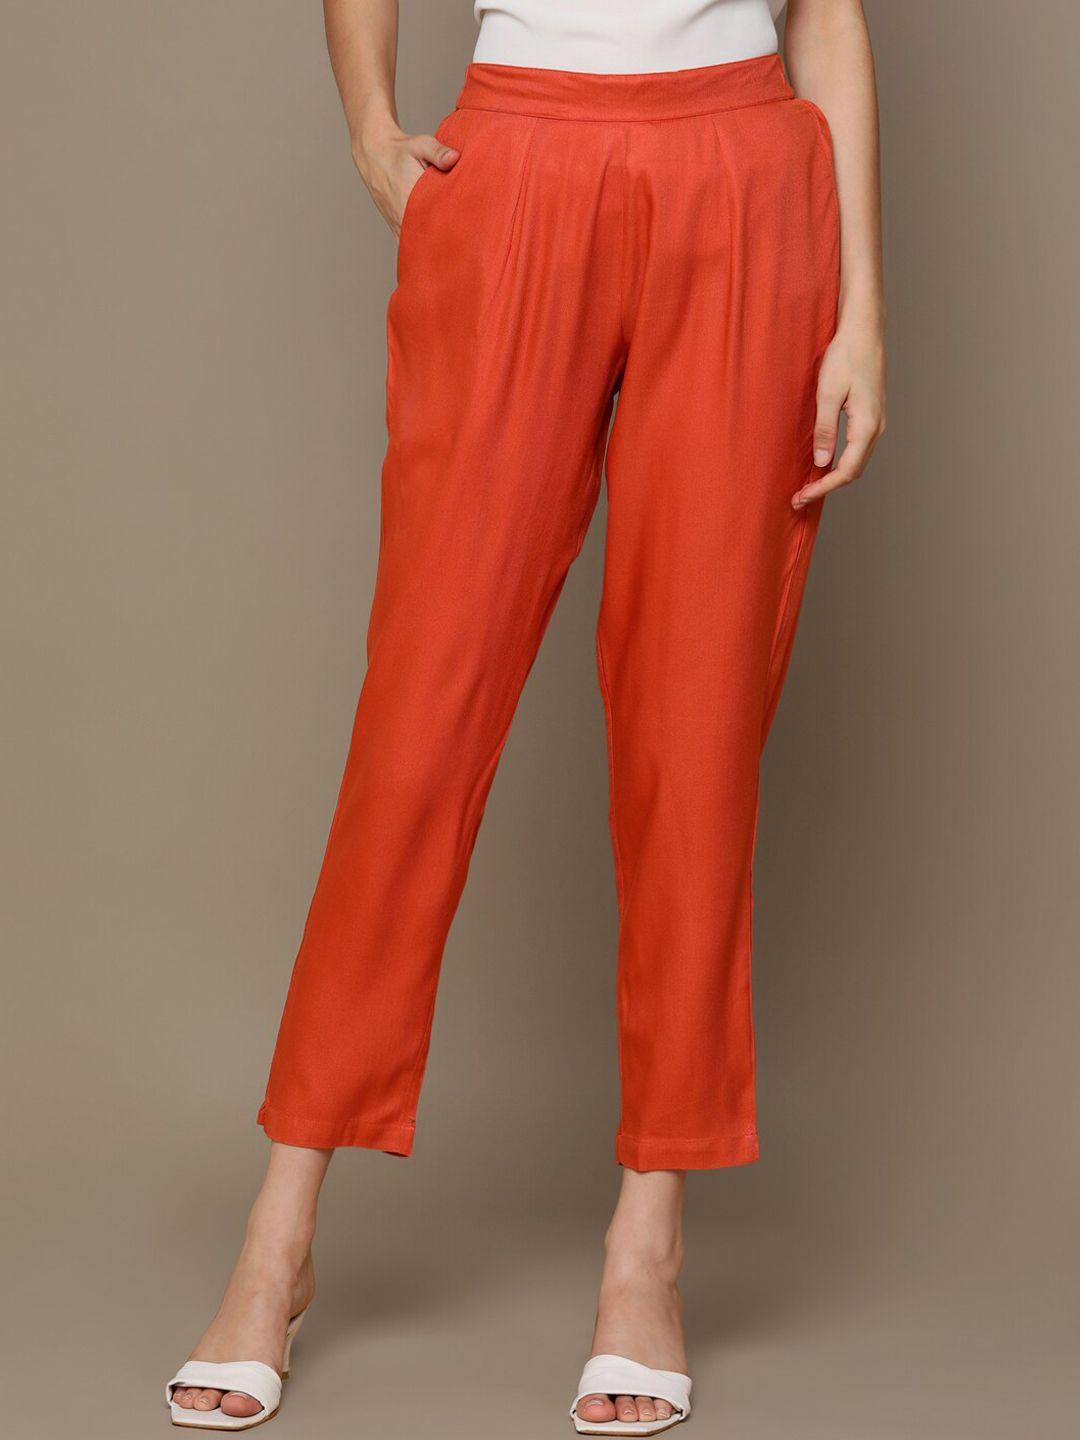 here&now women orange mid-rise cropped cigarette trousers